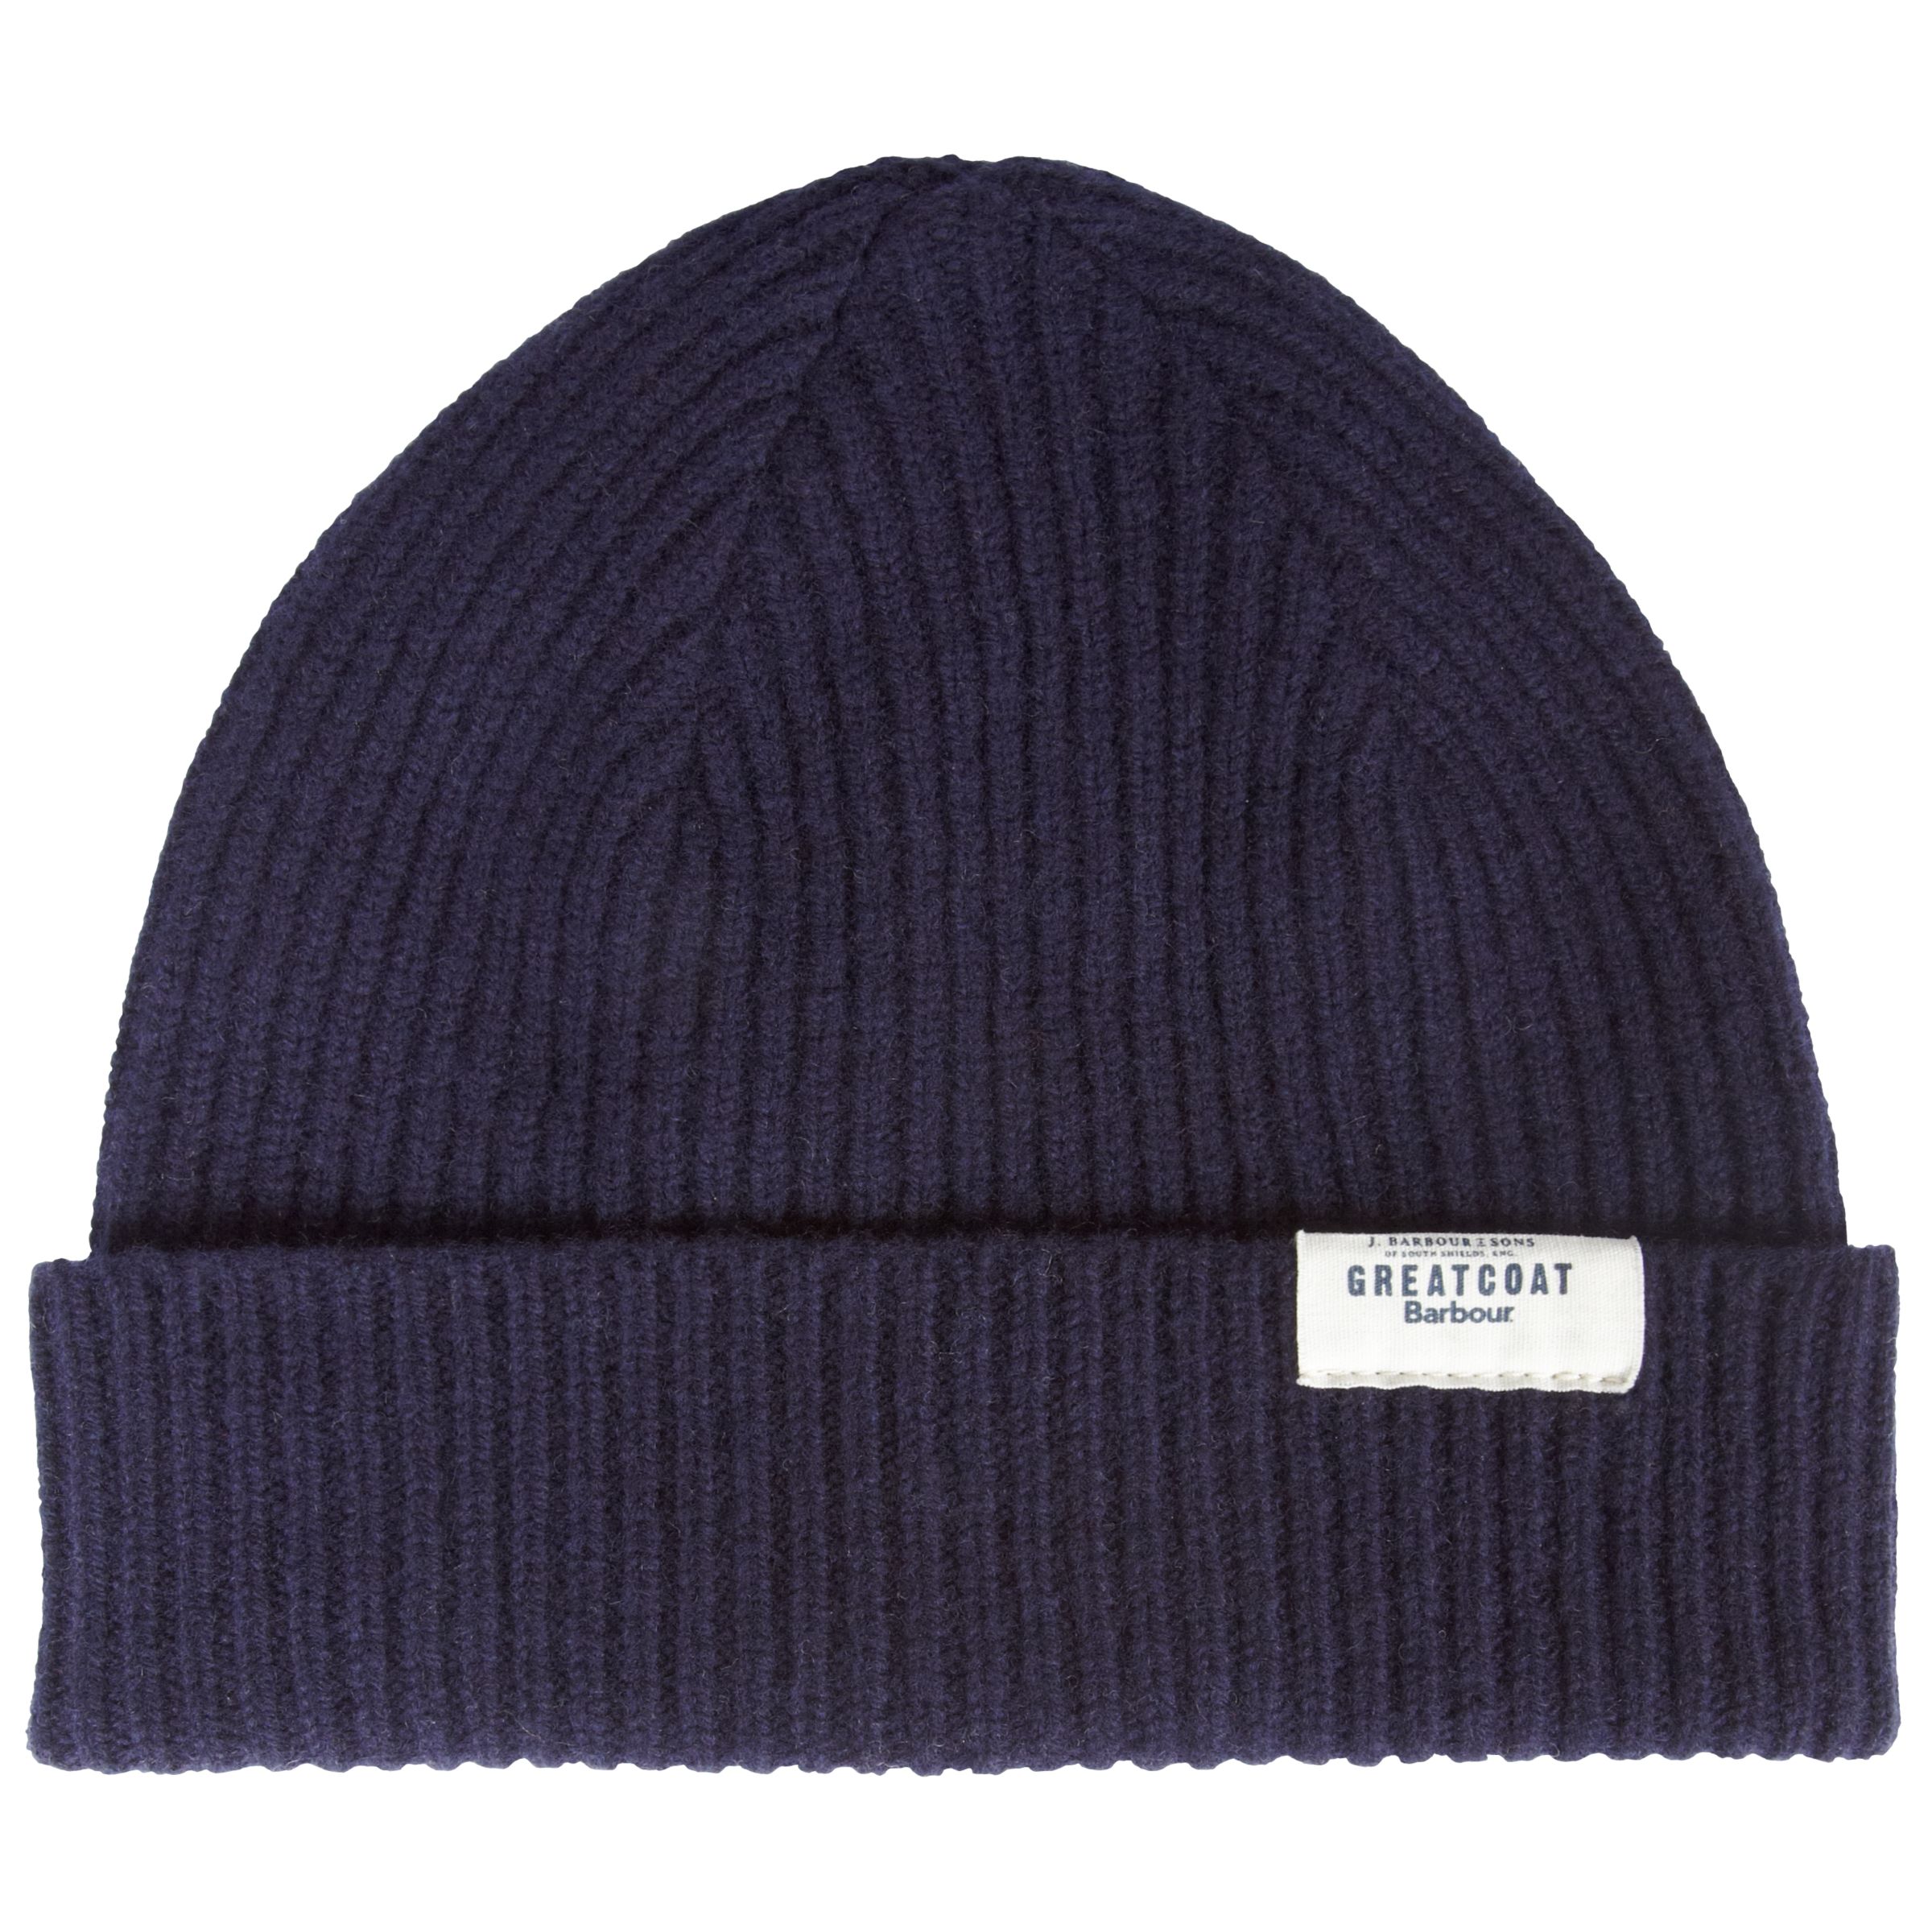 barbour knitted hat